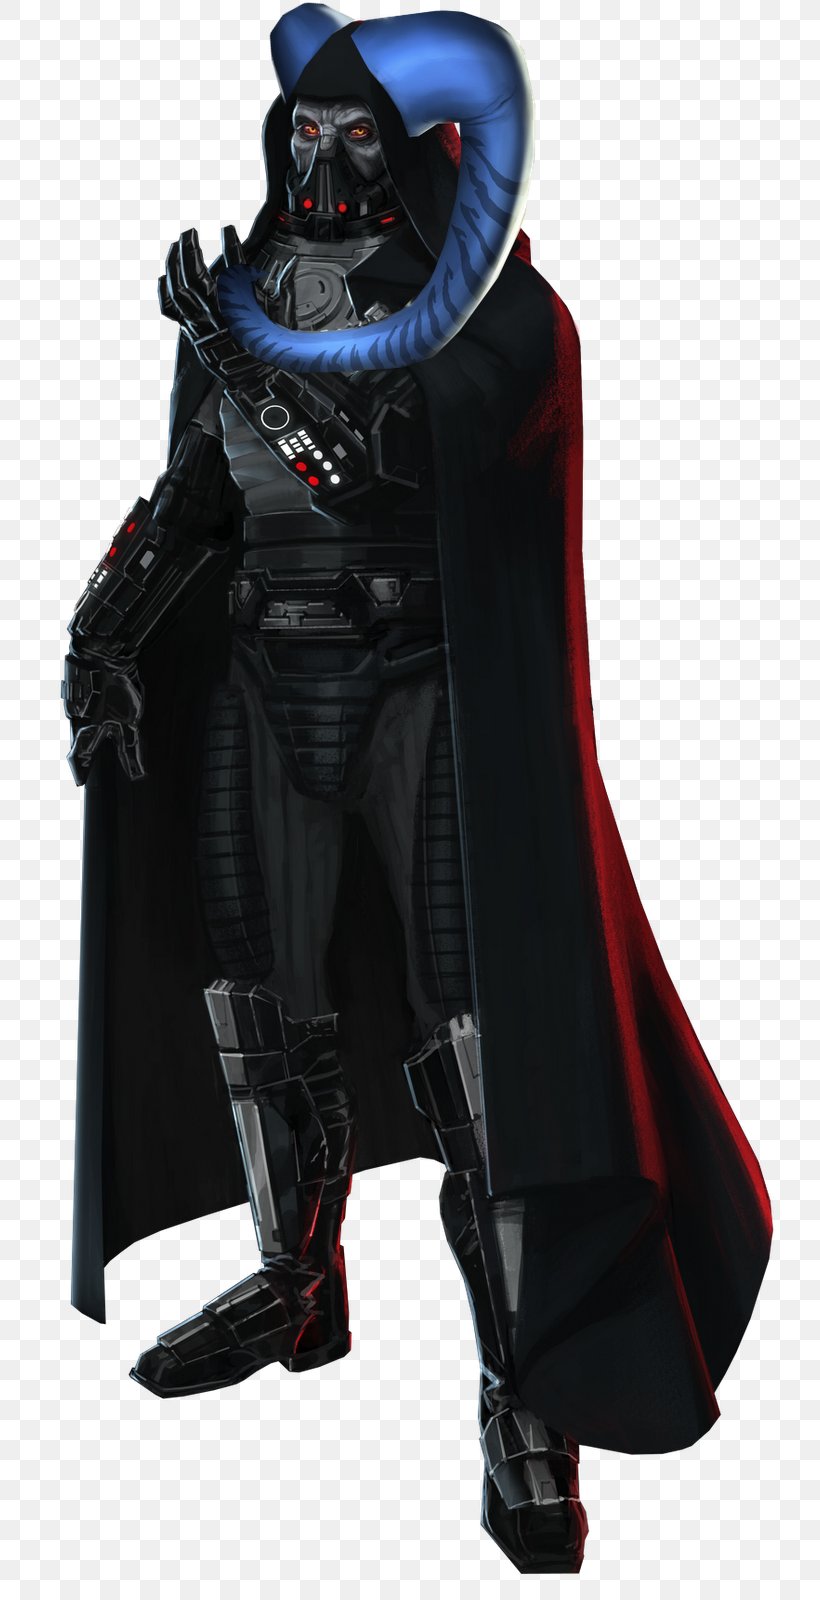 Star Wars: The Old Republic Anakin Skywalker Sith Video Game, PNG, 786x1600px, Star Wars The Old Republic, Anakin Skywalker, Computer Software, Costume, Fictional Character Download Free